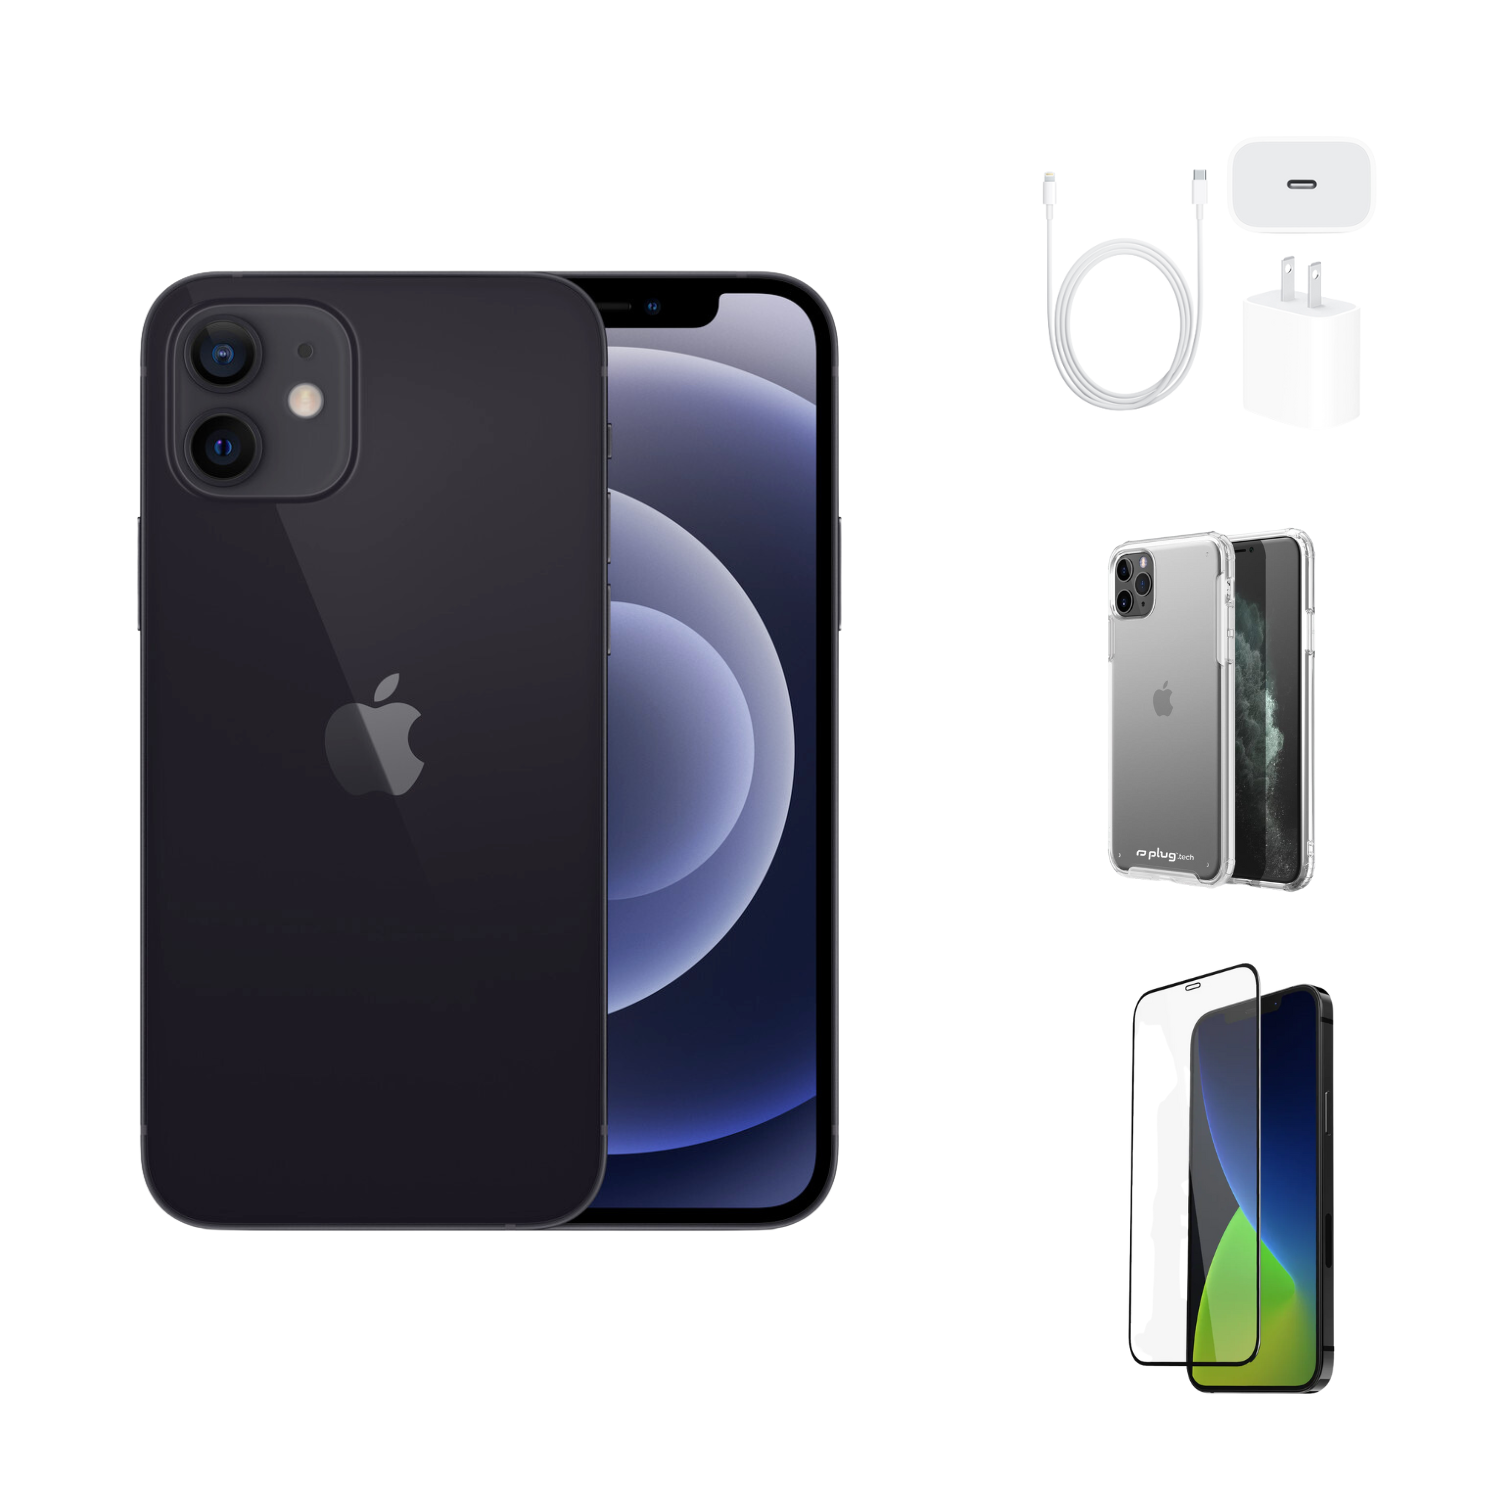 iPhone 11 Pro Max - Paquete inicial